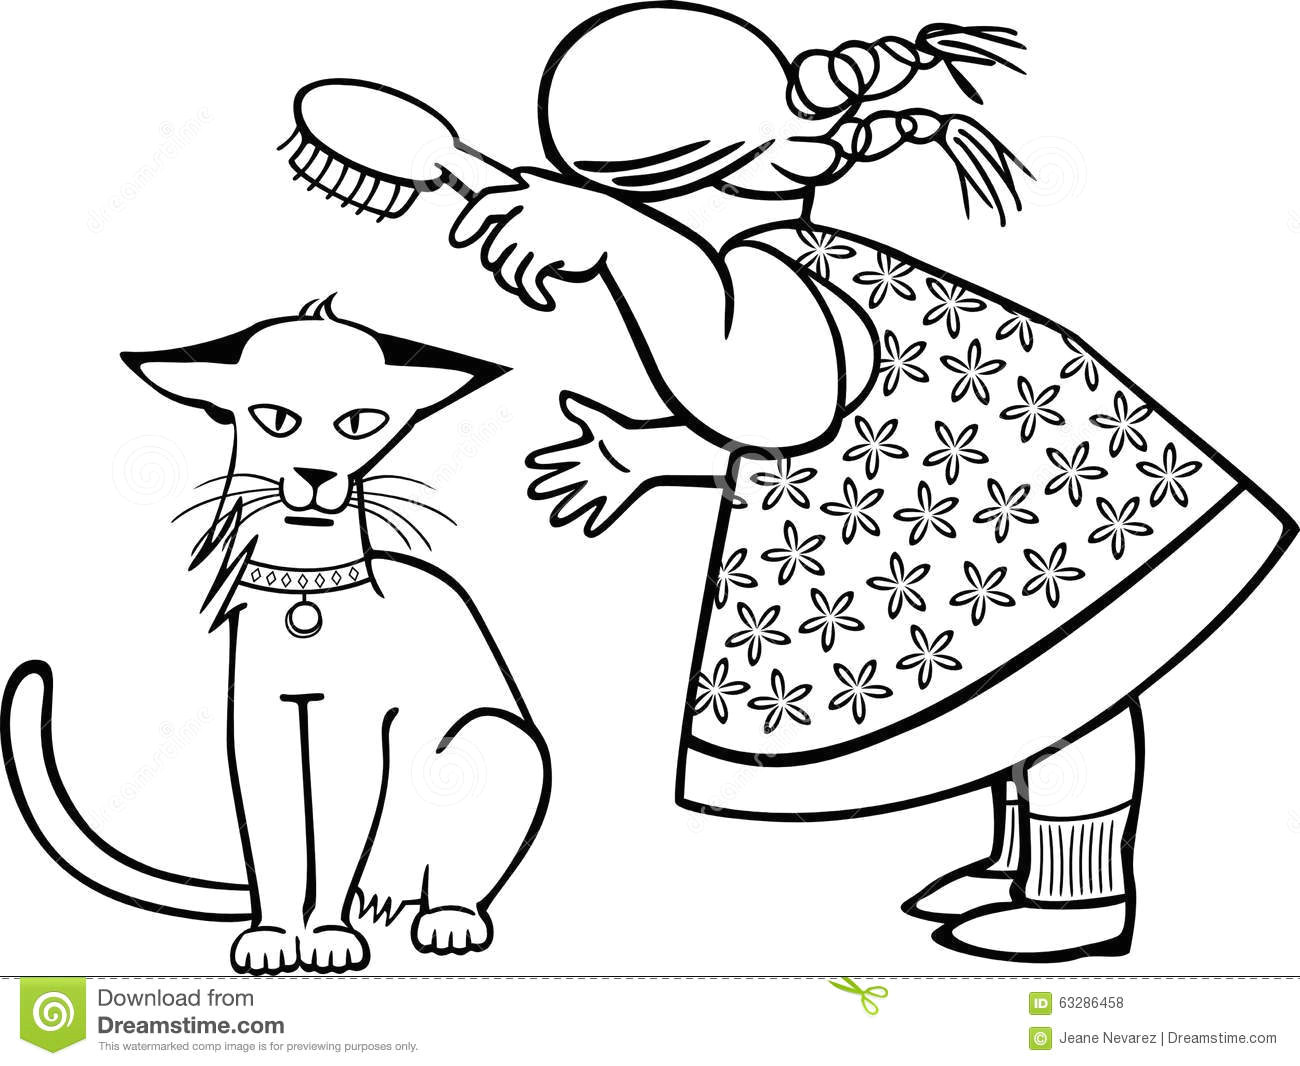 line drawing of a young girl brushing a cat sitting down